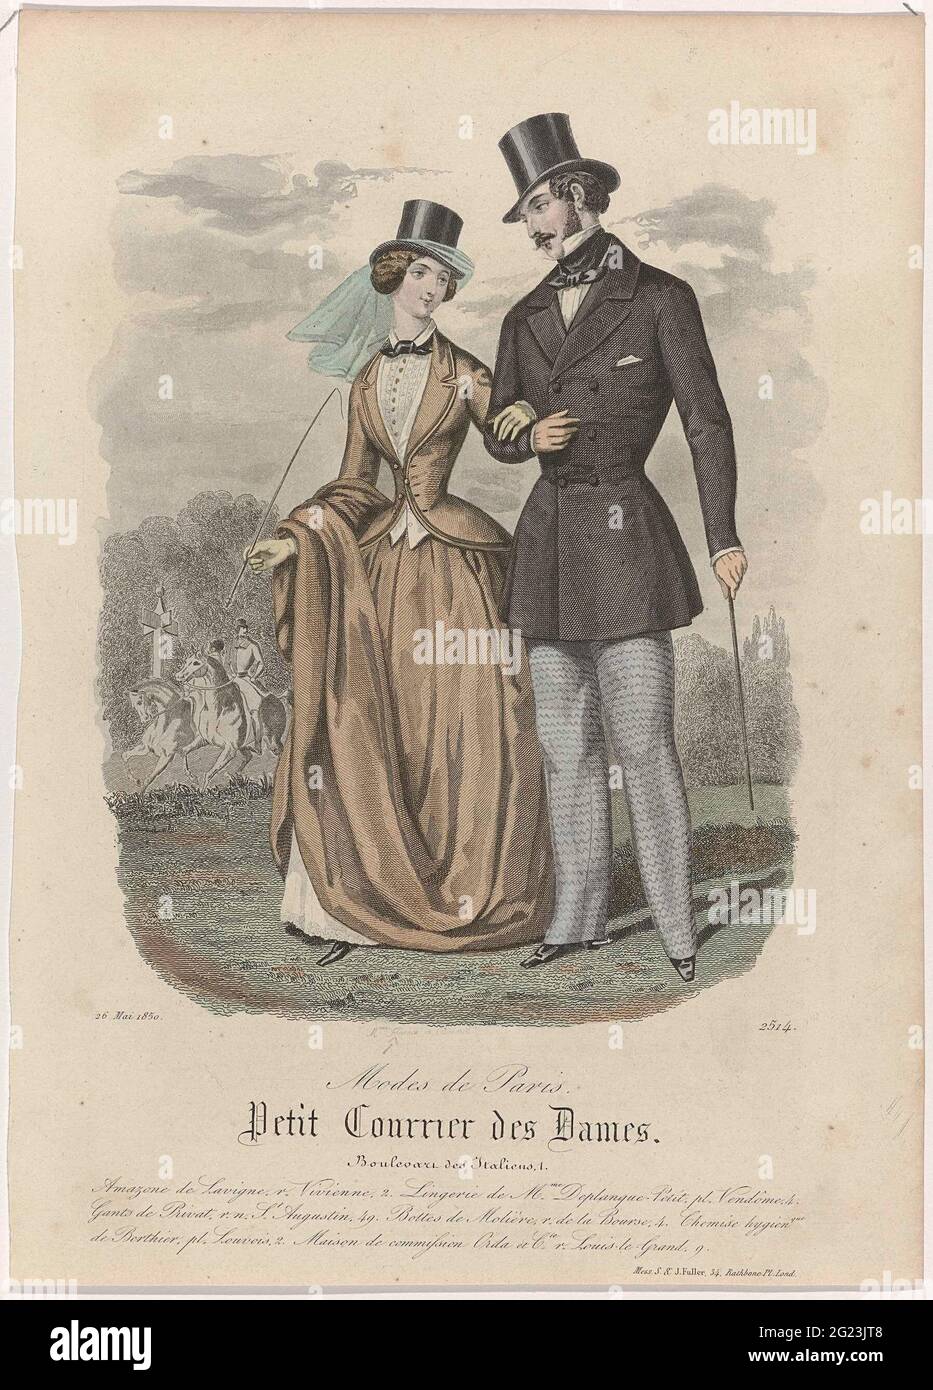 Petit Courrier des Ladies, 26 Mai 1850, no. 2514: Amazon de Lavign (...). A Heard Couple. The woman is wearing a rich costume. With the right hand she holds her skirt, so that her underskirt can be seen. Top hat with veil, driving sweep in hand. The man wears a double-breasted jacket with collar and lapel on long pants. Top hat and stuffed neckerchief. According to the caption: Amazon costume from Lavigne. Below some rules advertising text for different accessories. Print from the fashion magazine Petit Courier des Ladies (1821-1868). Stock Photo